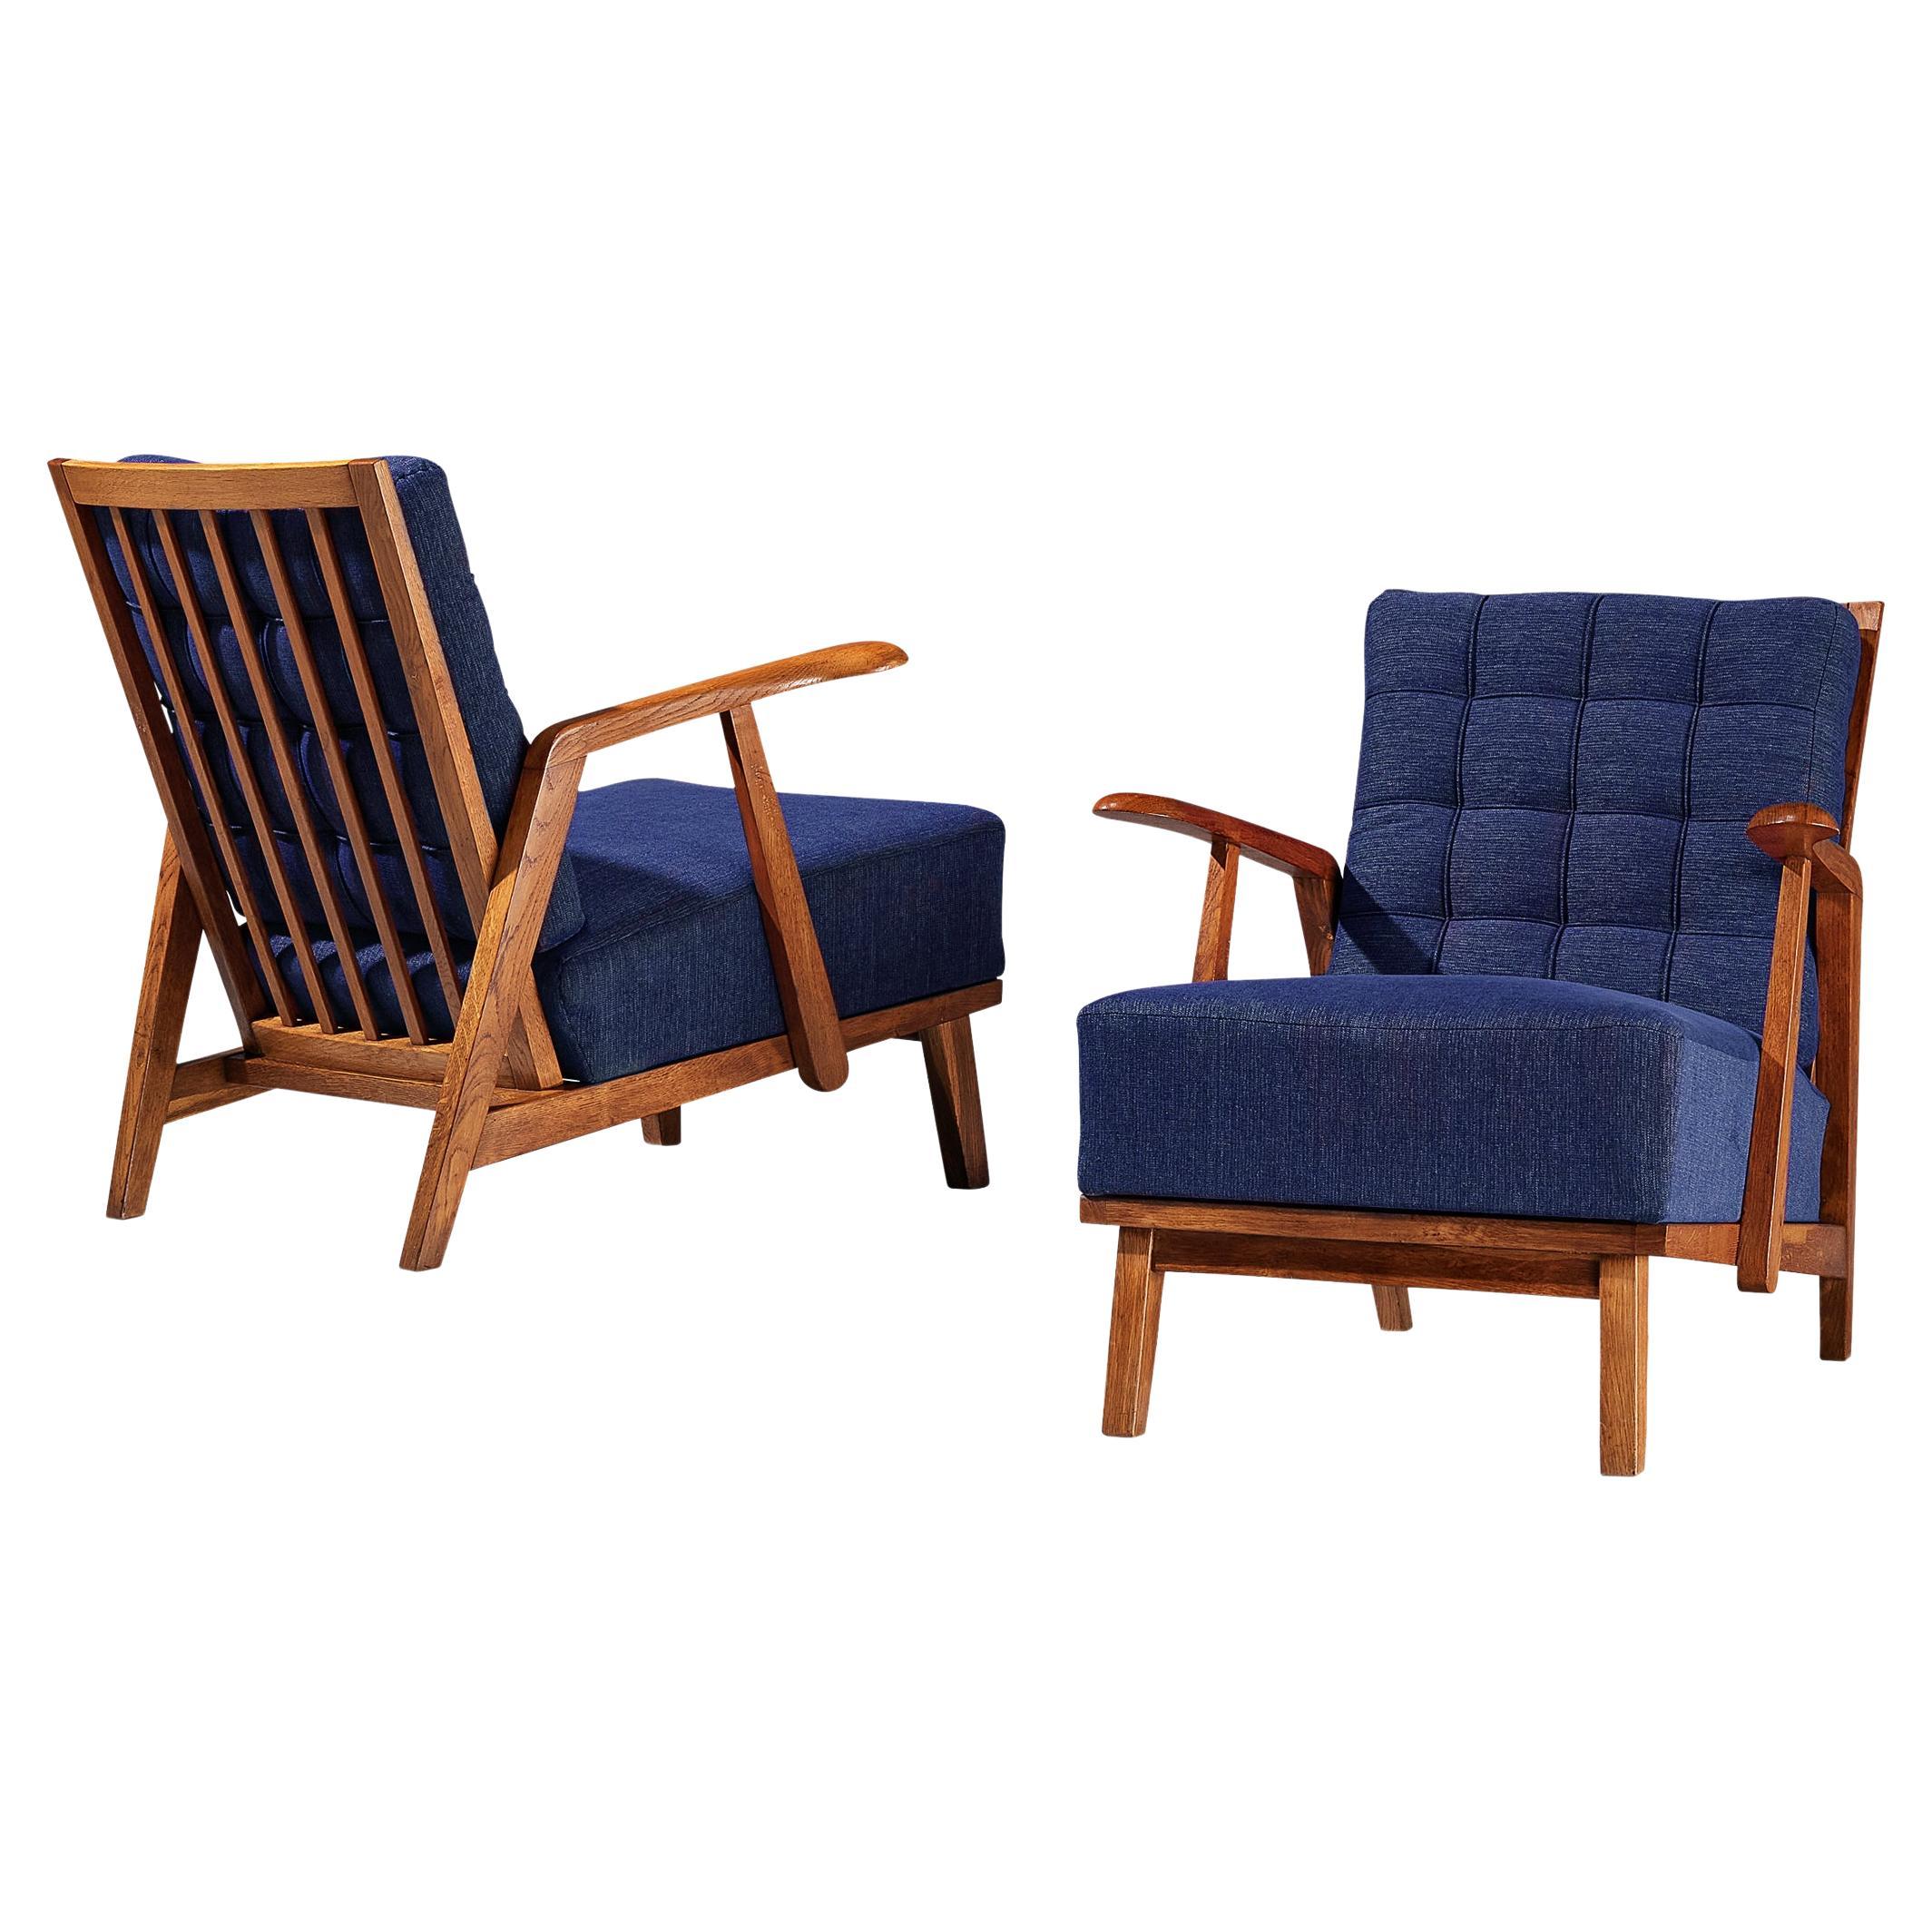 Pair of Lounge Chairs in Oak With Slatted Backs in Dark Blue Upholstery 